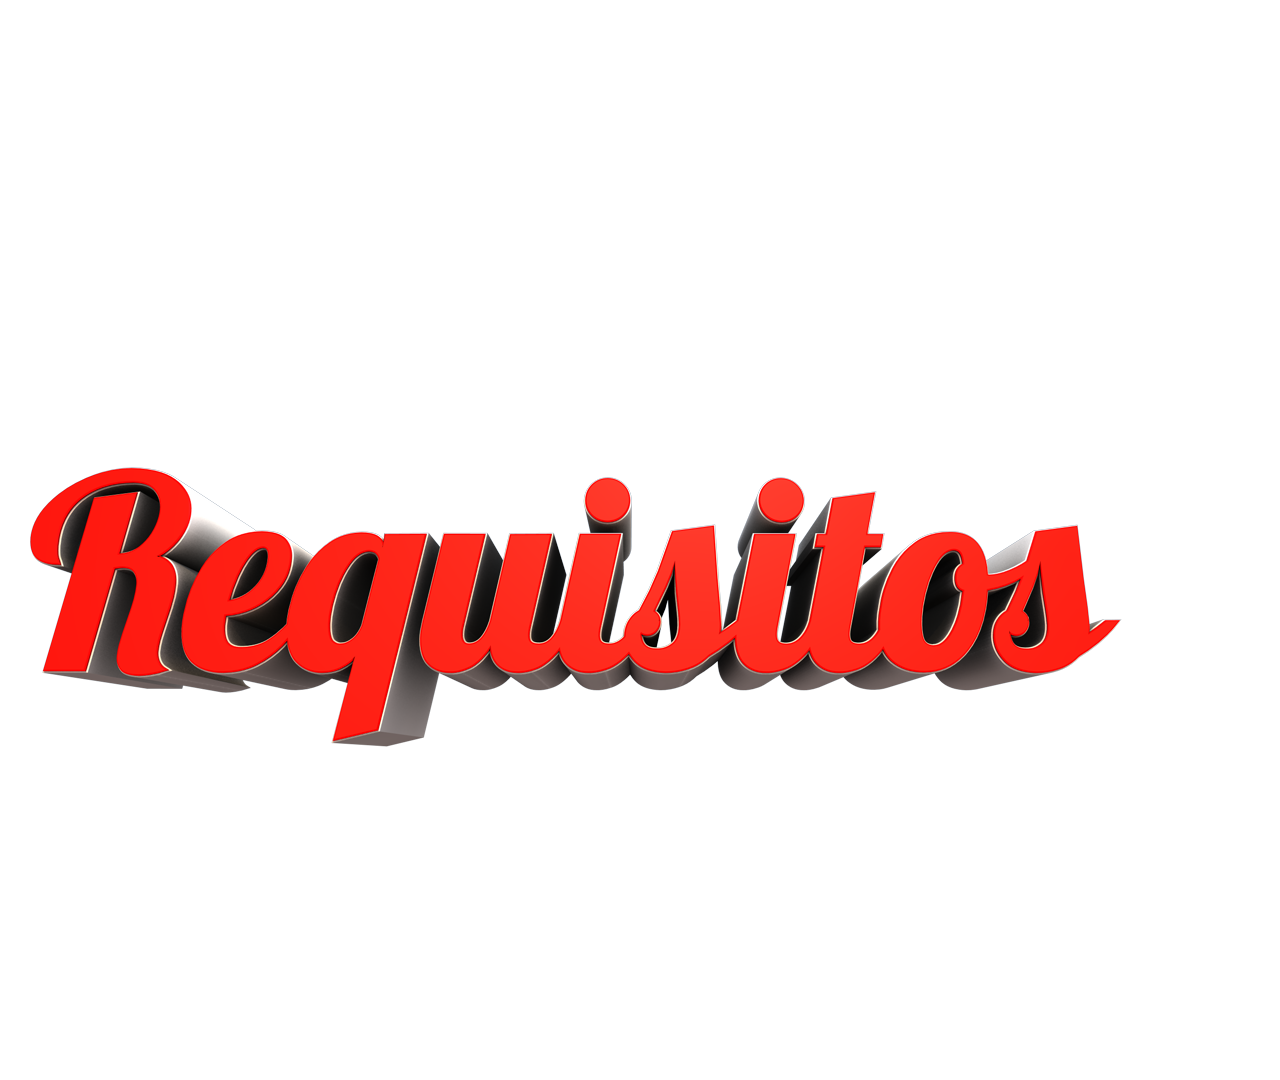 Requisitos.png